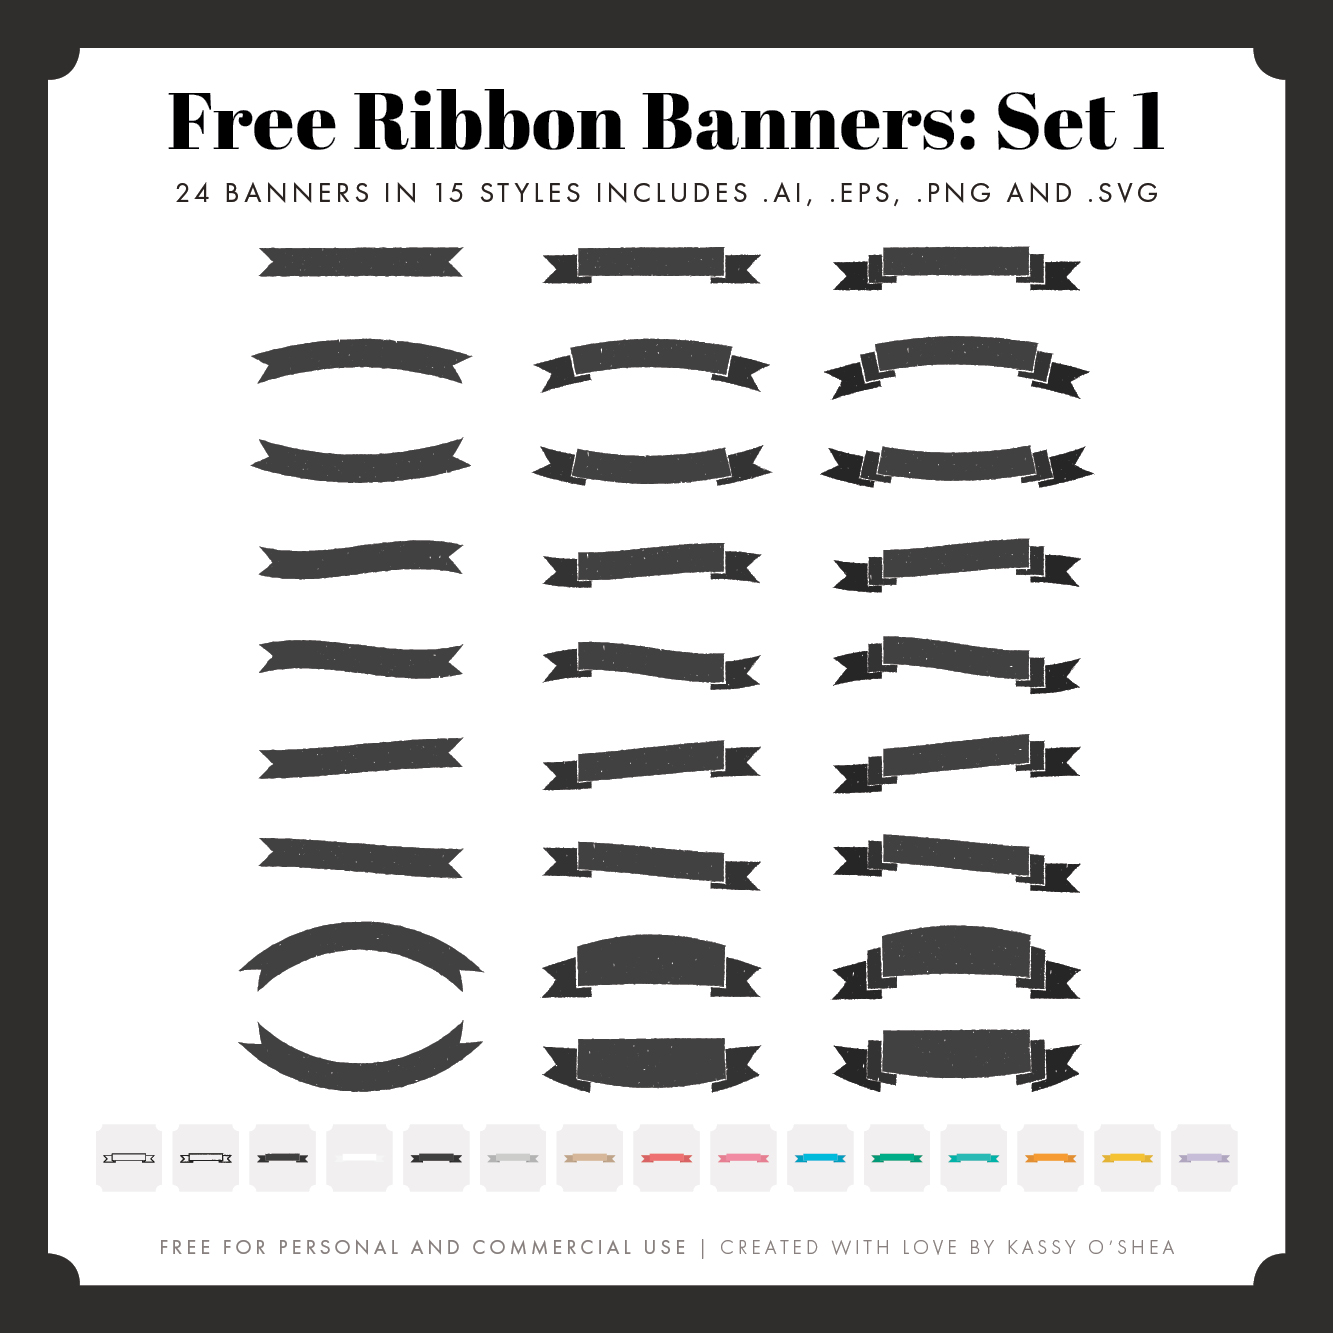 Free Ribbon Banners: Set 1 by apparate on DeviantArt